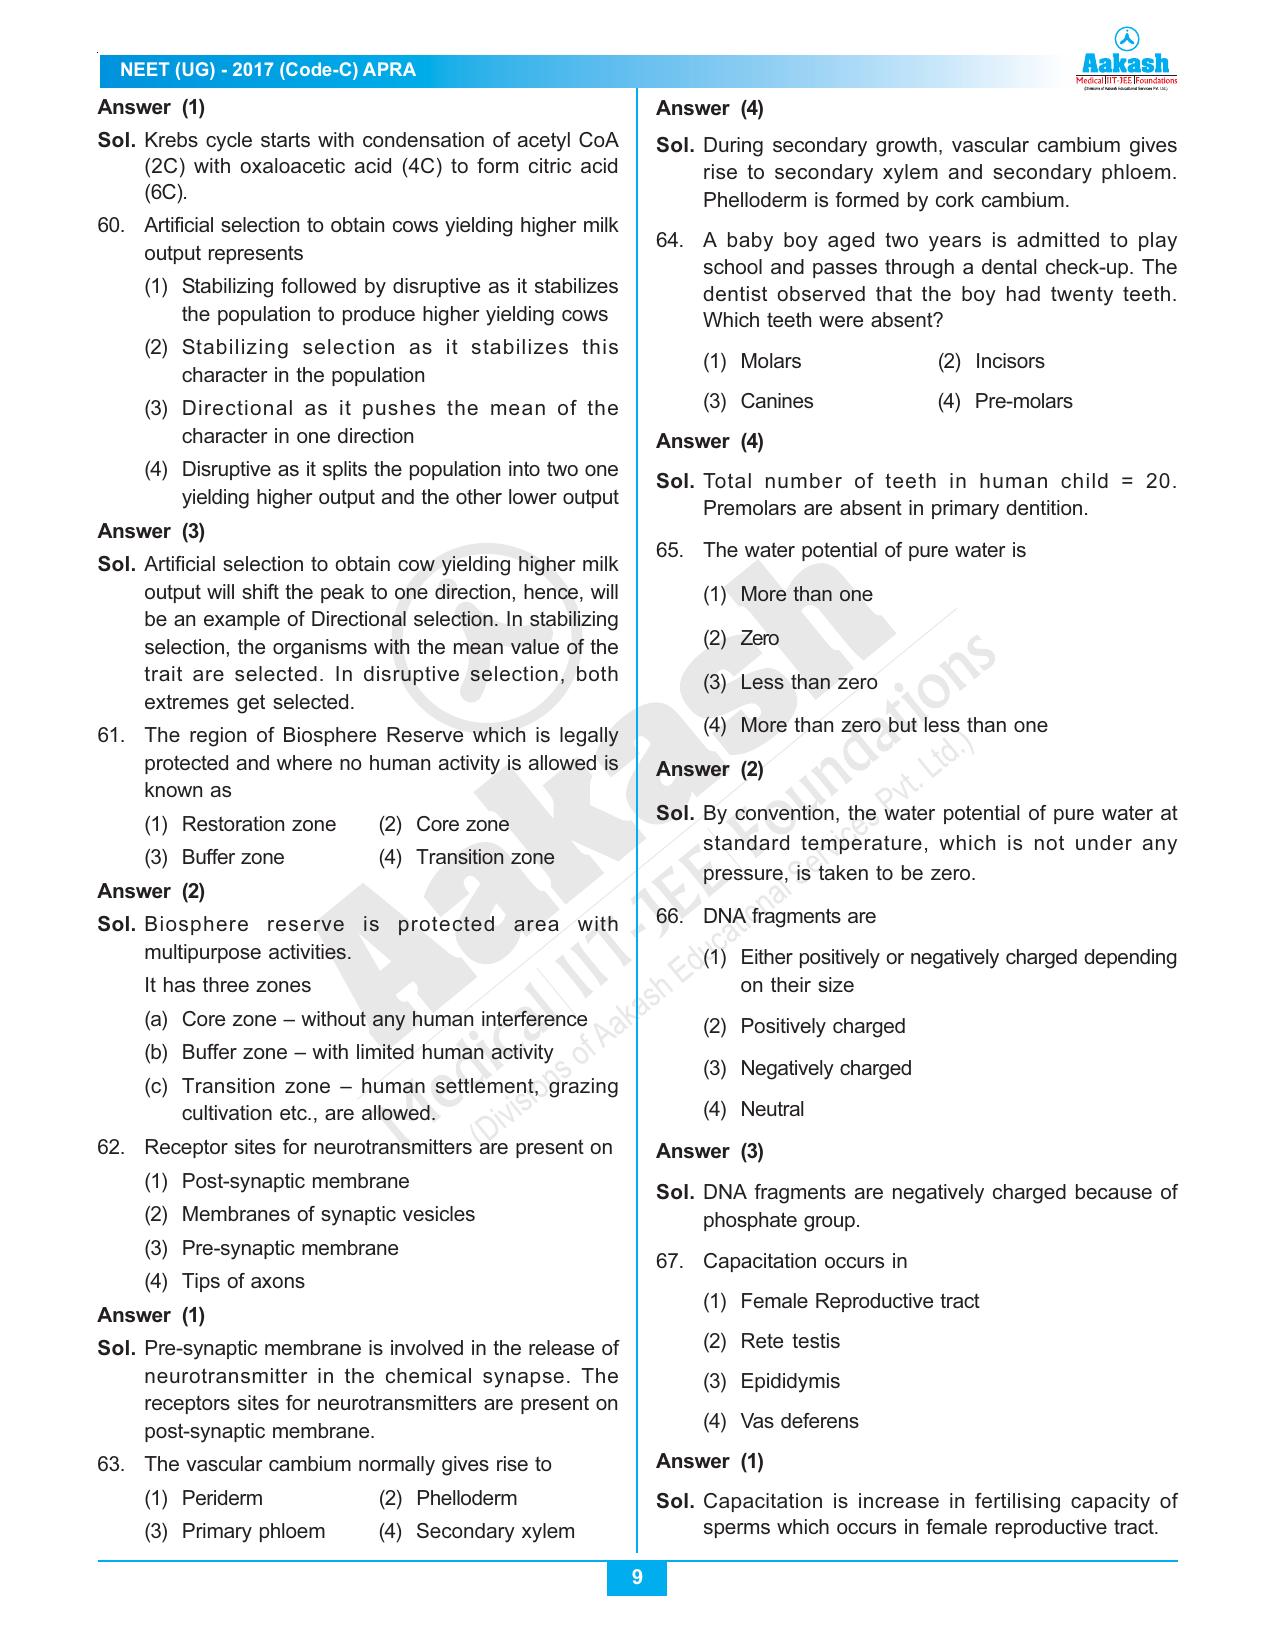  NEET Code C 2017 Answer & Solutions - Page 9